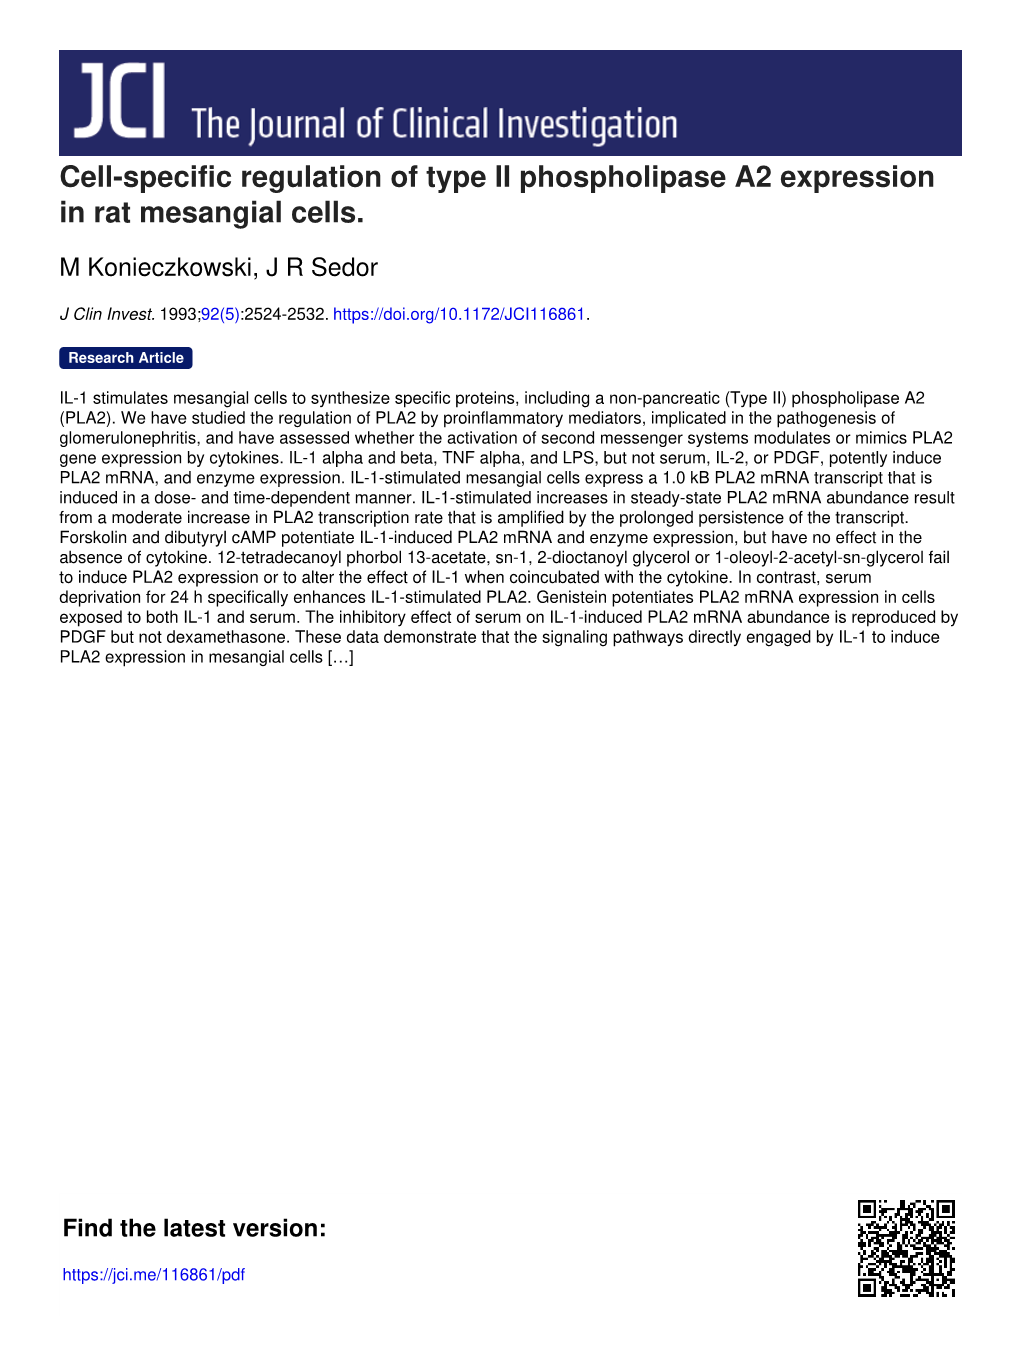 Cell-Specific Regulation of Type II Phospholipase A2 Expression in Rat Mesangial Cells